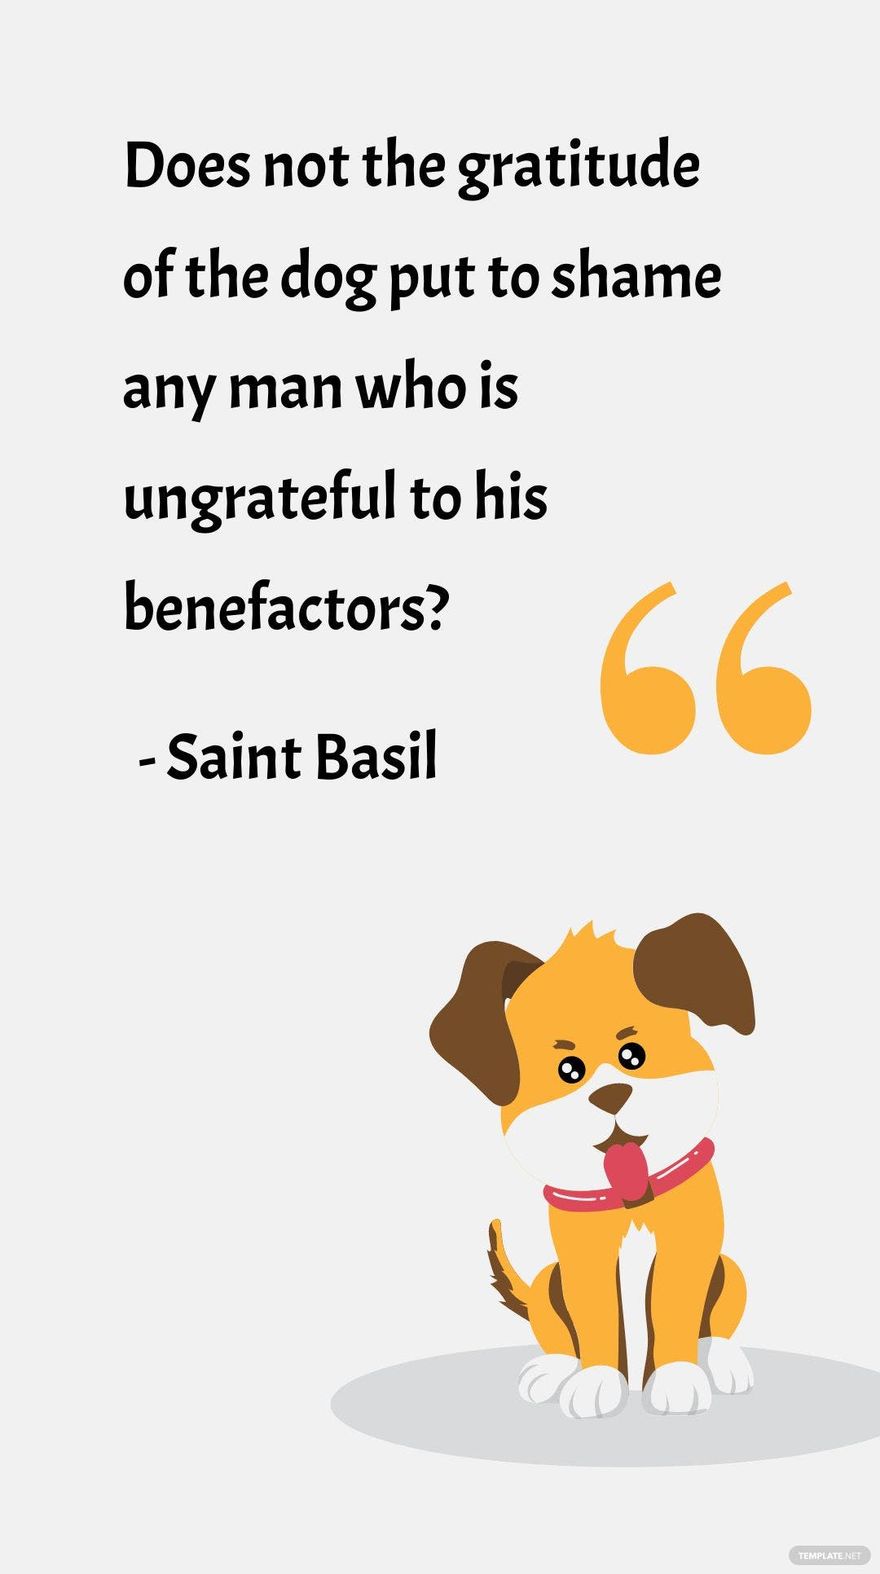 Free Saint Basil - Does not the gratitude of the dog put to shame any man who is ungrateful to his benefactors? in JPG